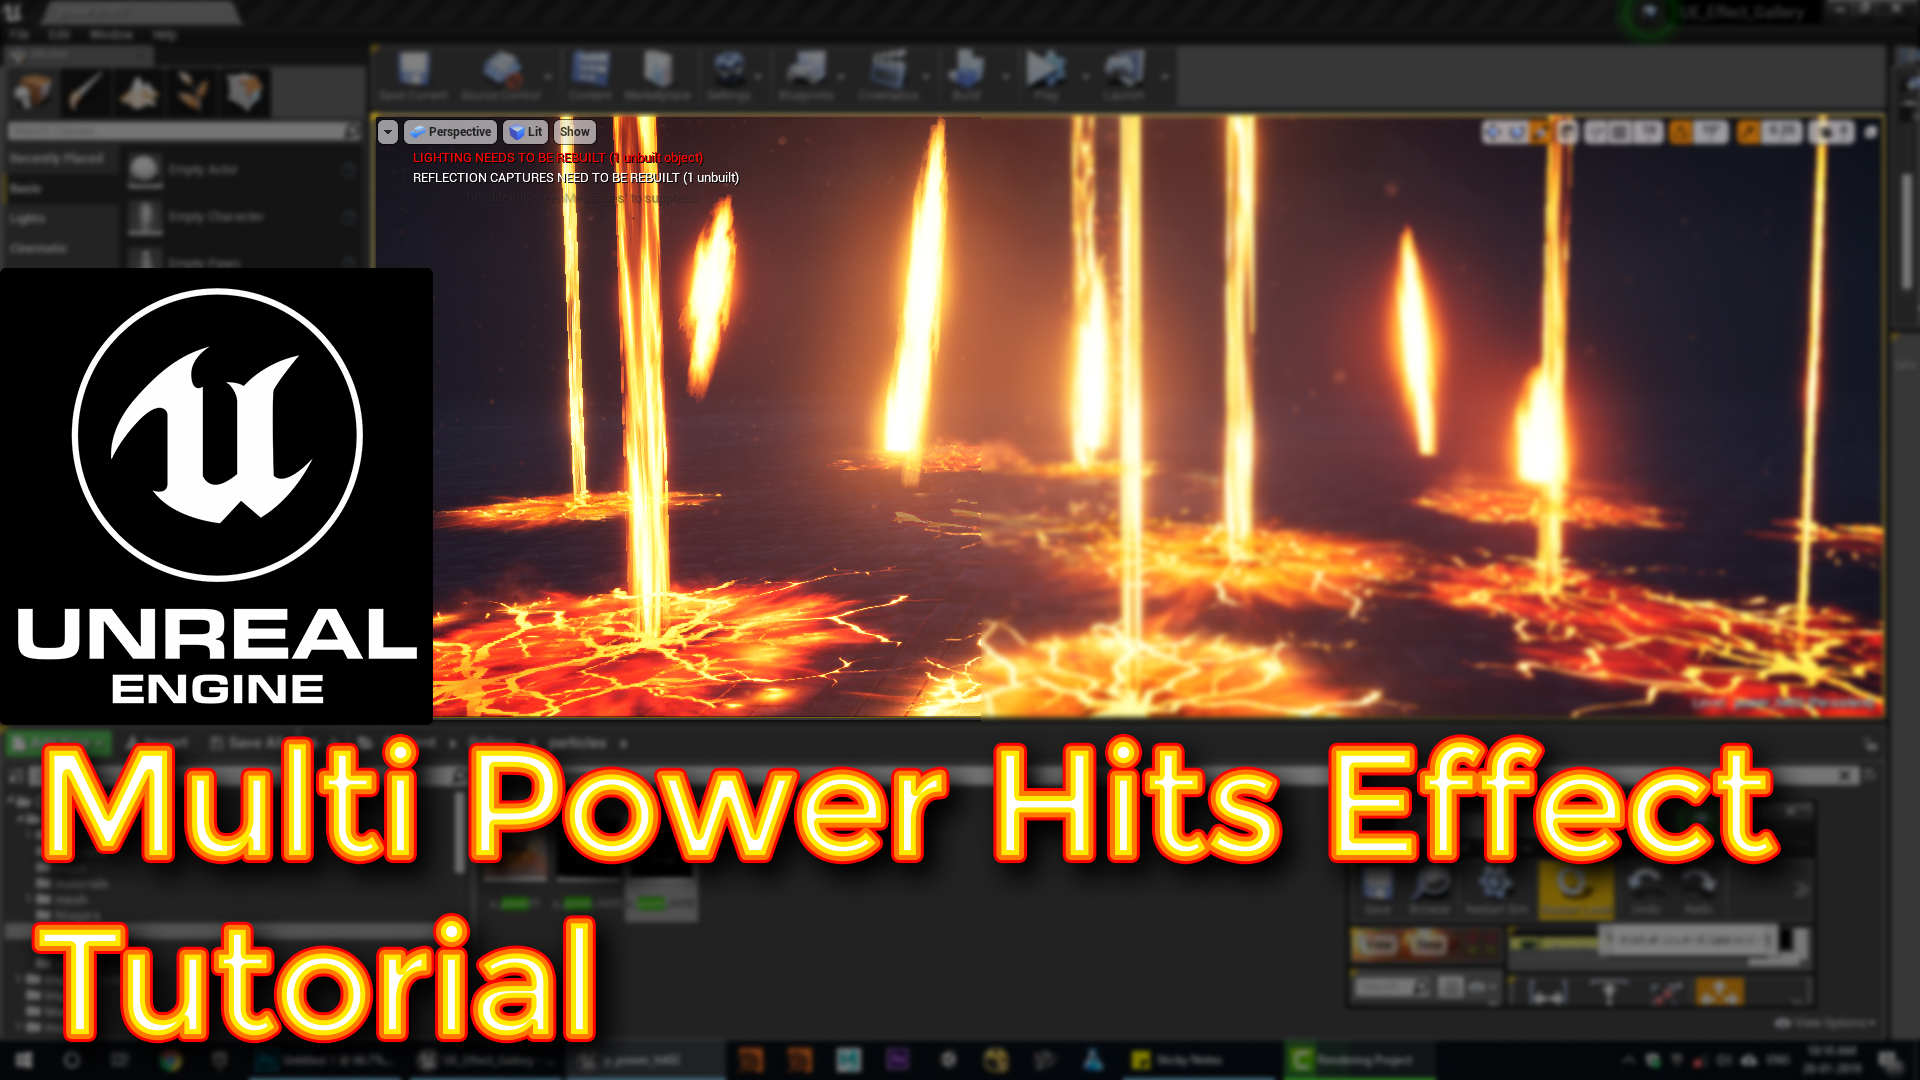 Unreal Engine Multi Power Hits Effect Tutorial